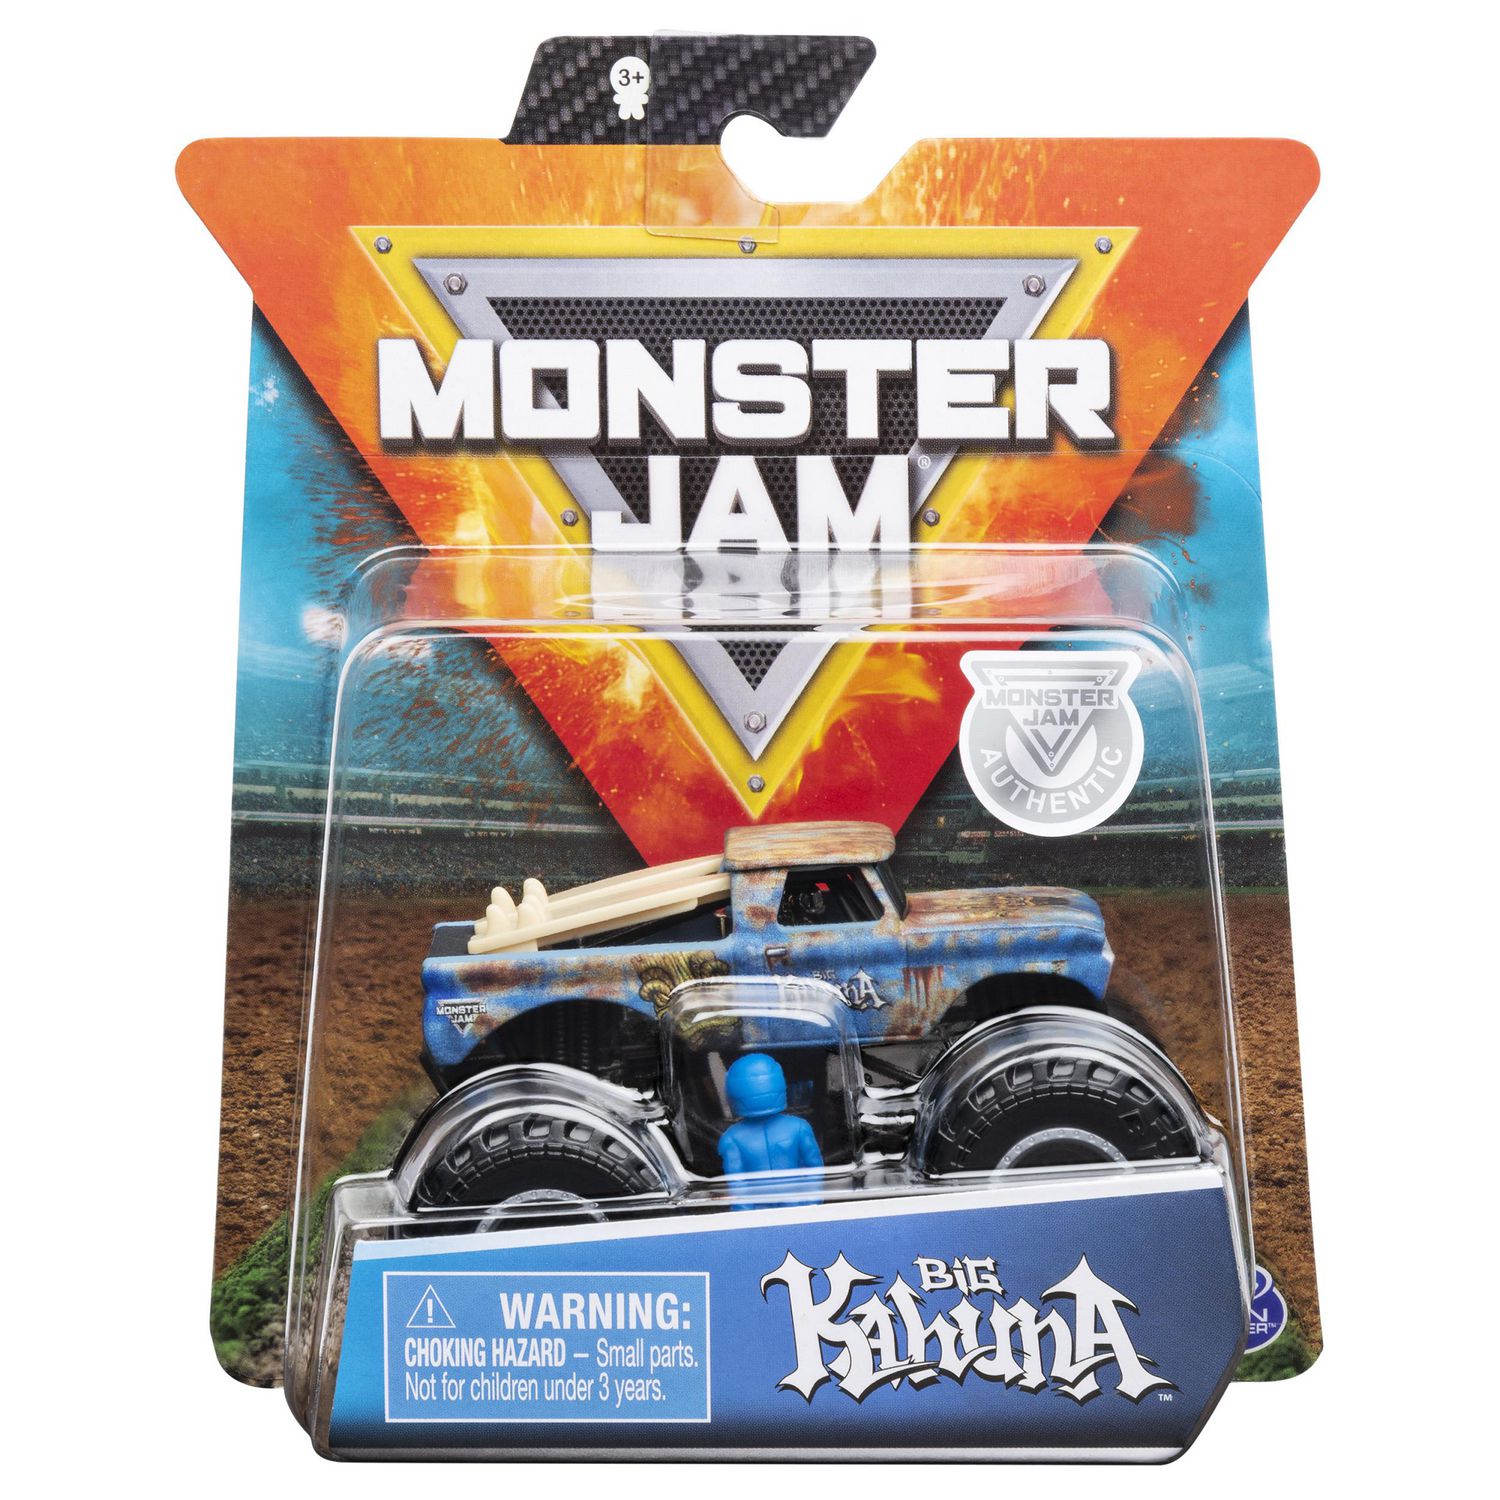 big kahuna monster truck toy